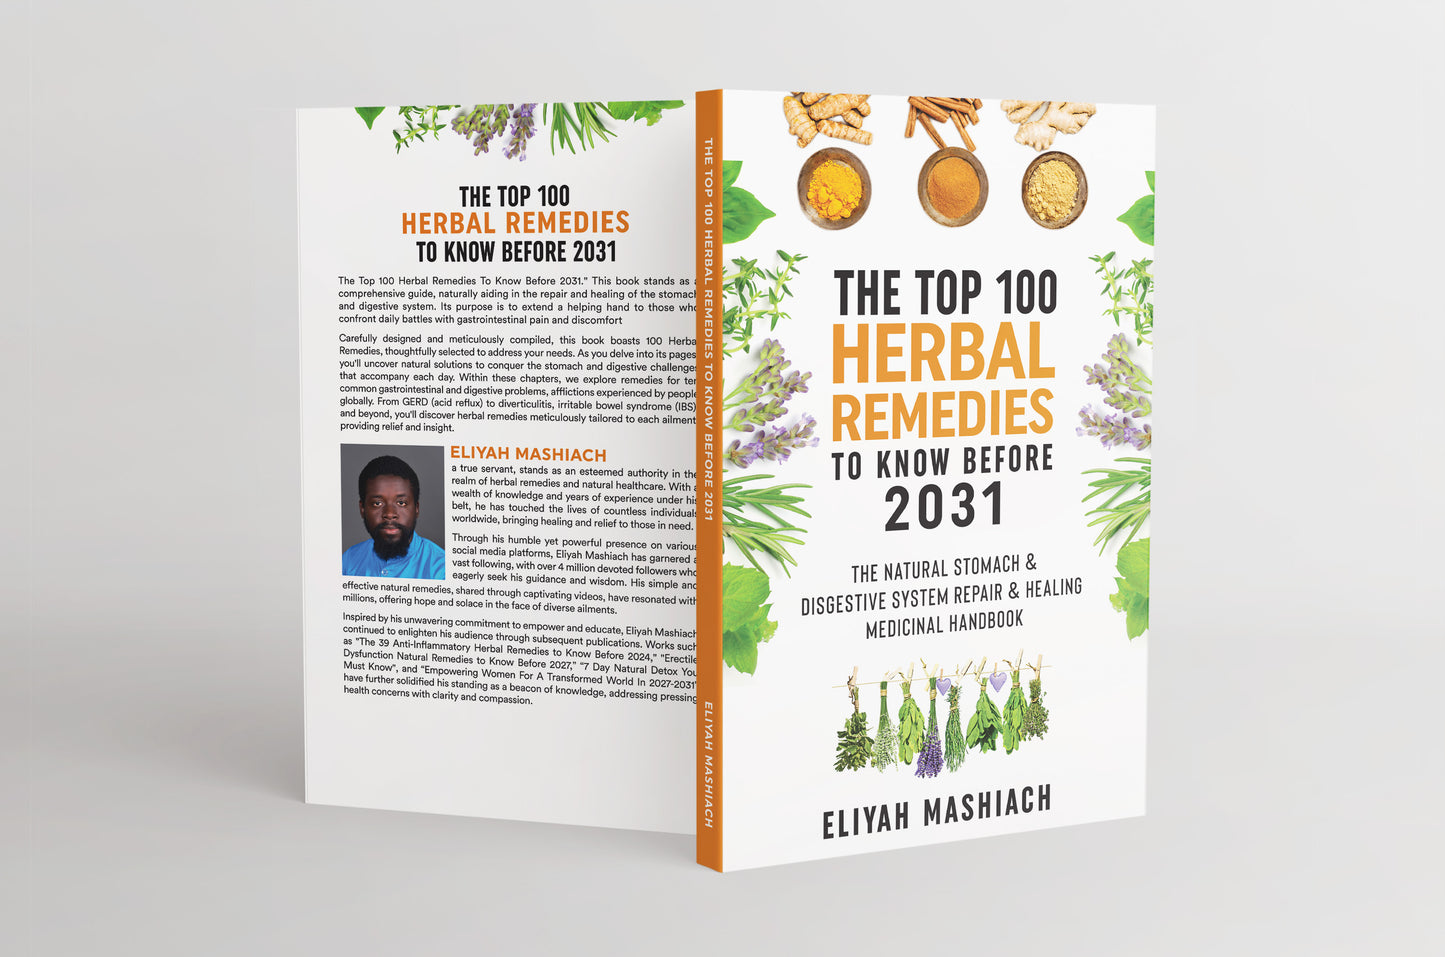 THE TOP 100  HERBAL  REMEDIES TO KNOW  BEFORE 2031!!! THE NATURAL STOMACH & DISGESTIVE SYSTEM REPAIR &  HEALING MEDICINAL BOOK